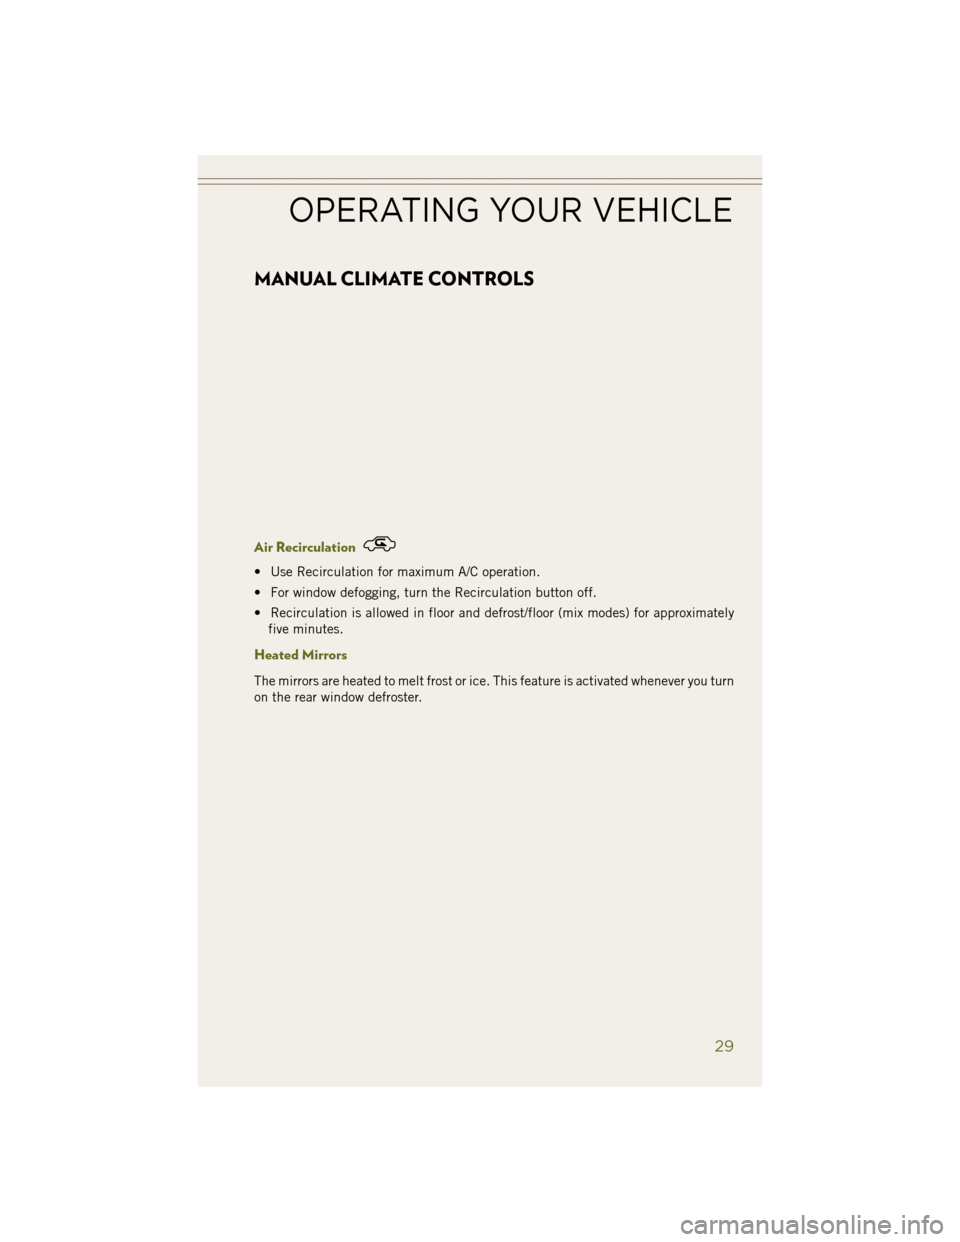 JEEP WRANGLER 2014 JK / 3.G User Guide MANUAL CLIMATE CONTROLS
Air Recirculation
• Use Recirculation for maximum A/C operation.
• For window defogging, turn the Recirculation button off.
• Recirculation is allowed in floor and defros